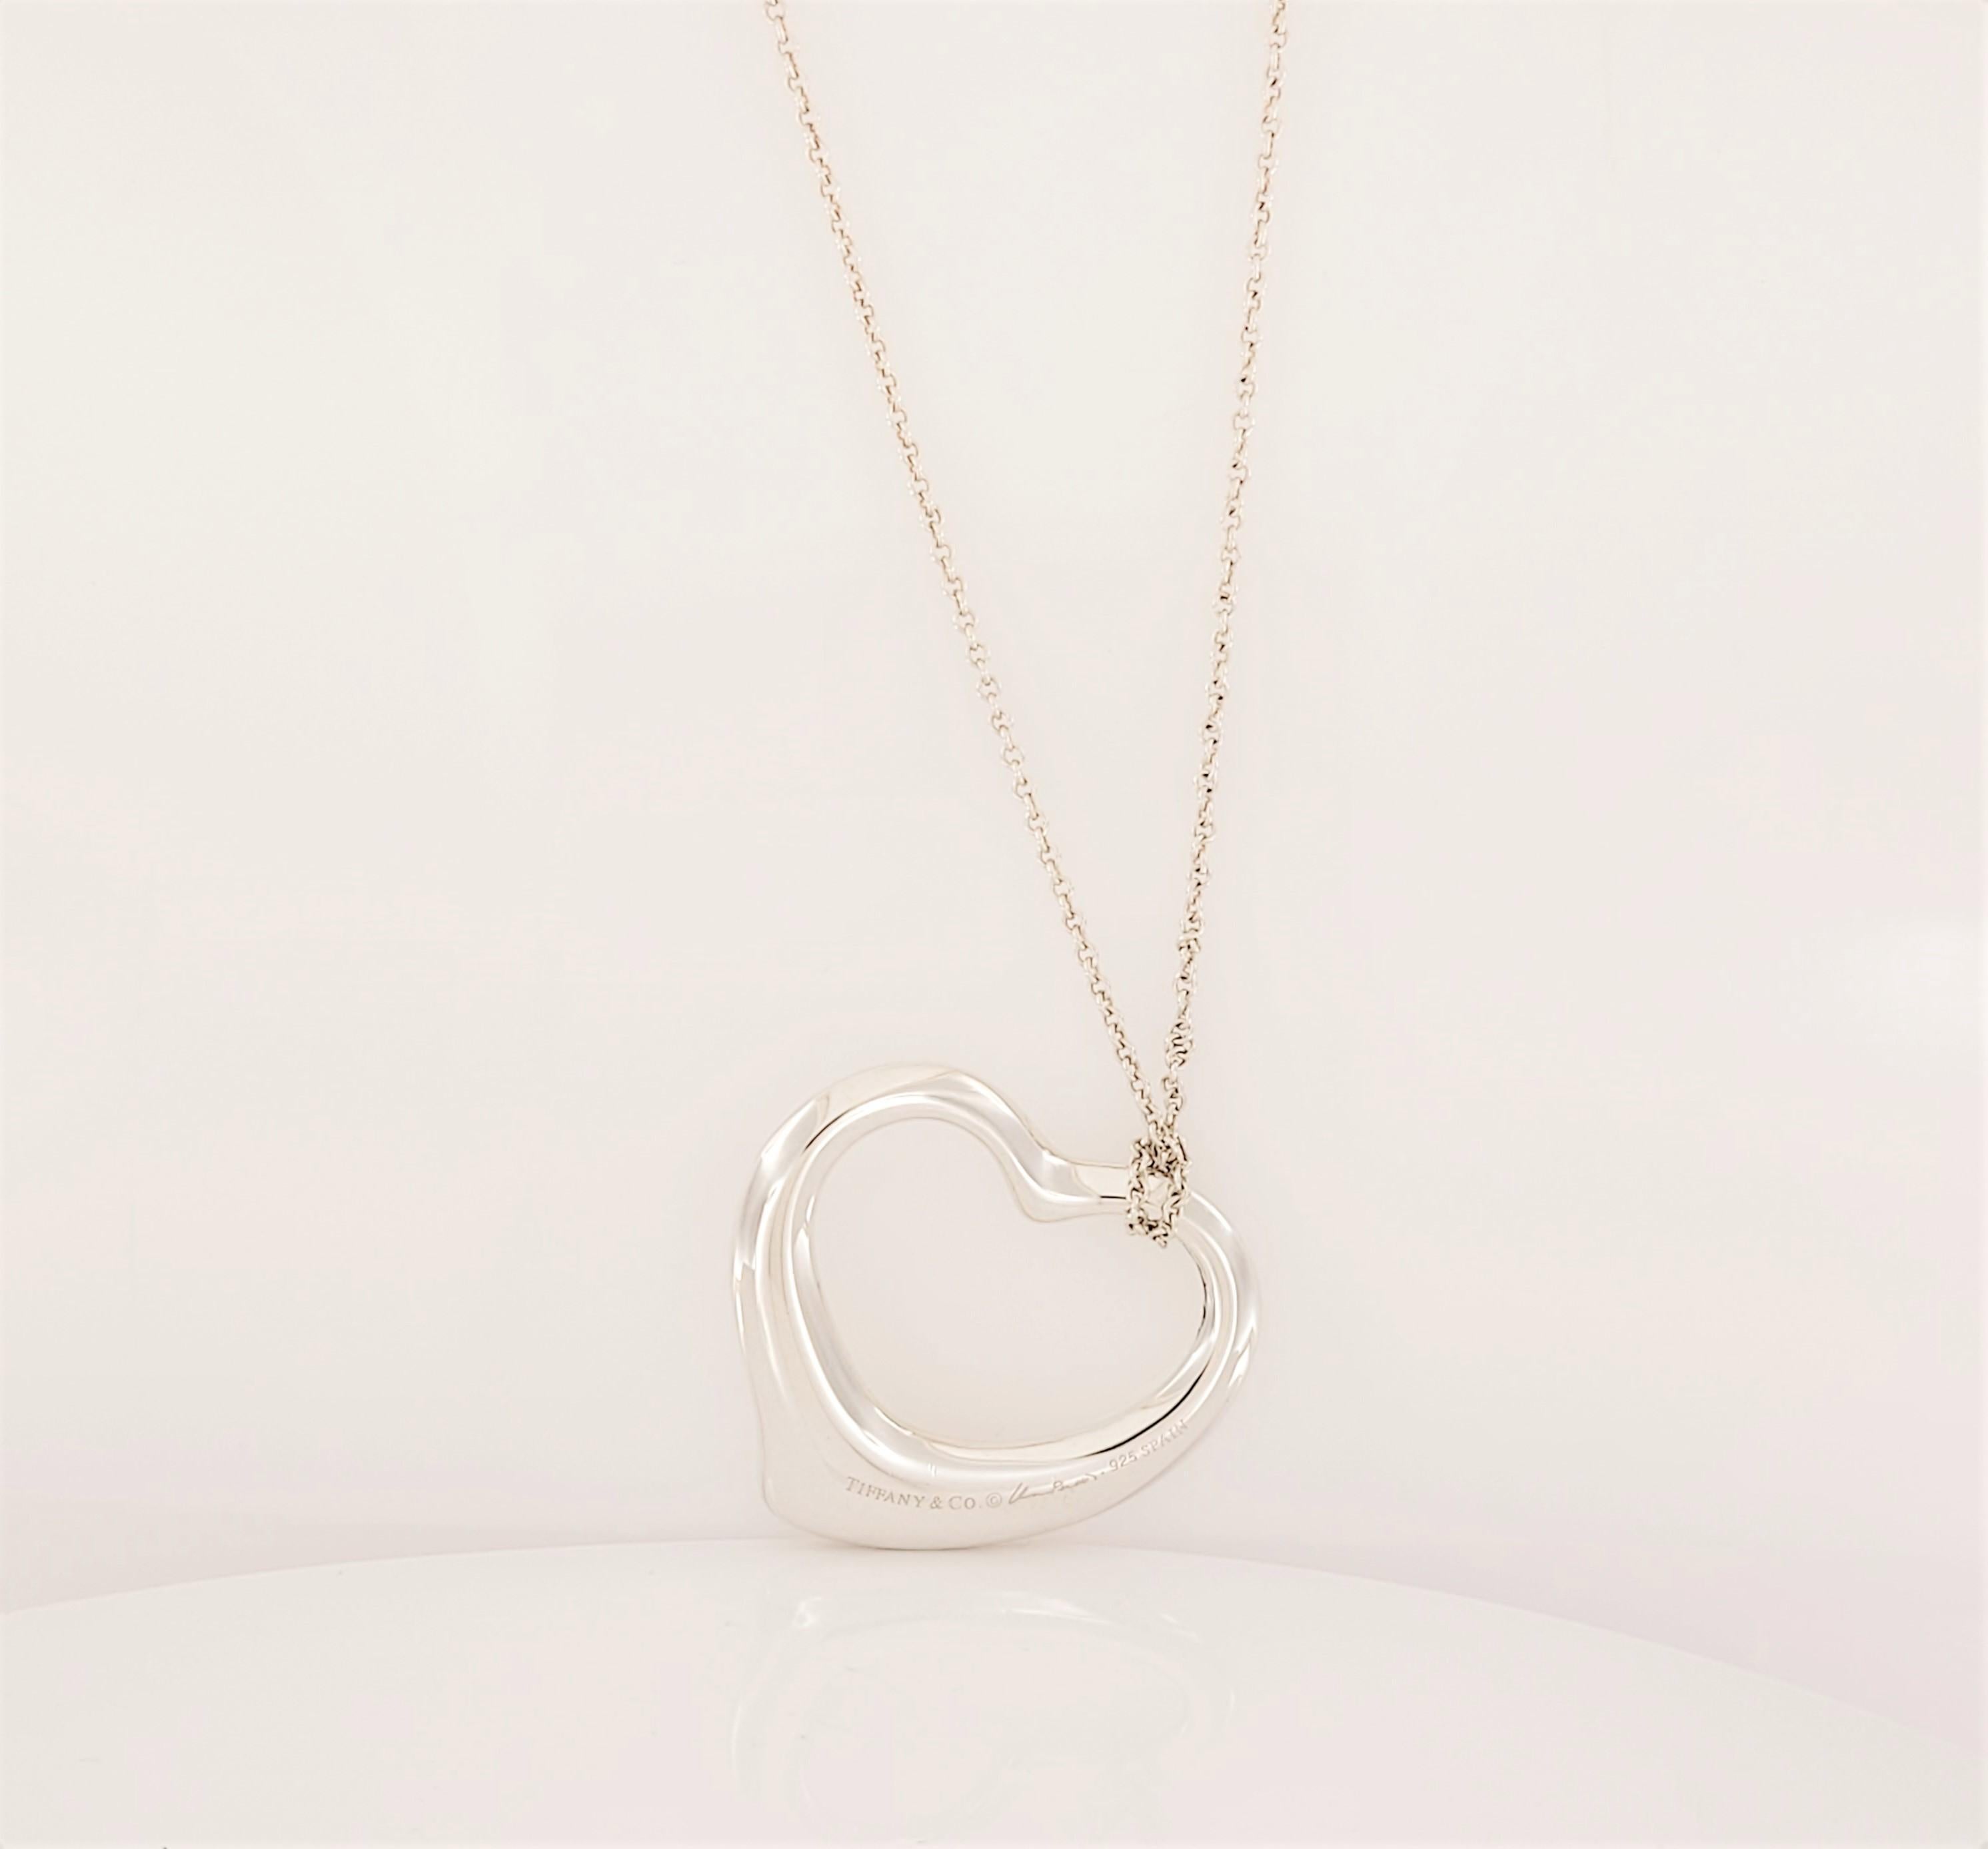 Elsa Peretti  Tiffany &co Heart Pendant
Material Sterling Silver 
Metal Purity 925
Pendant shape Heart
Pendant Dimension 35X 31mm 
Weight 19.6gr
Condition New, without tag
Comes with Tiffany& co pouch 
Retail Price $1.450